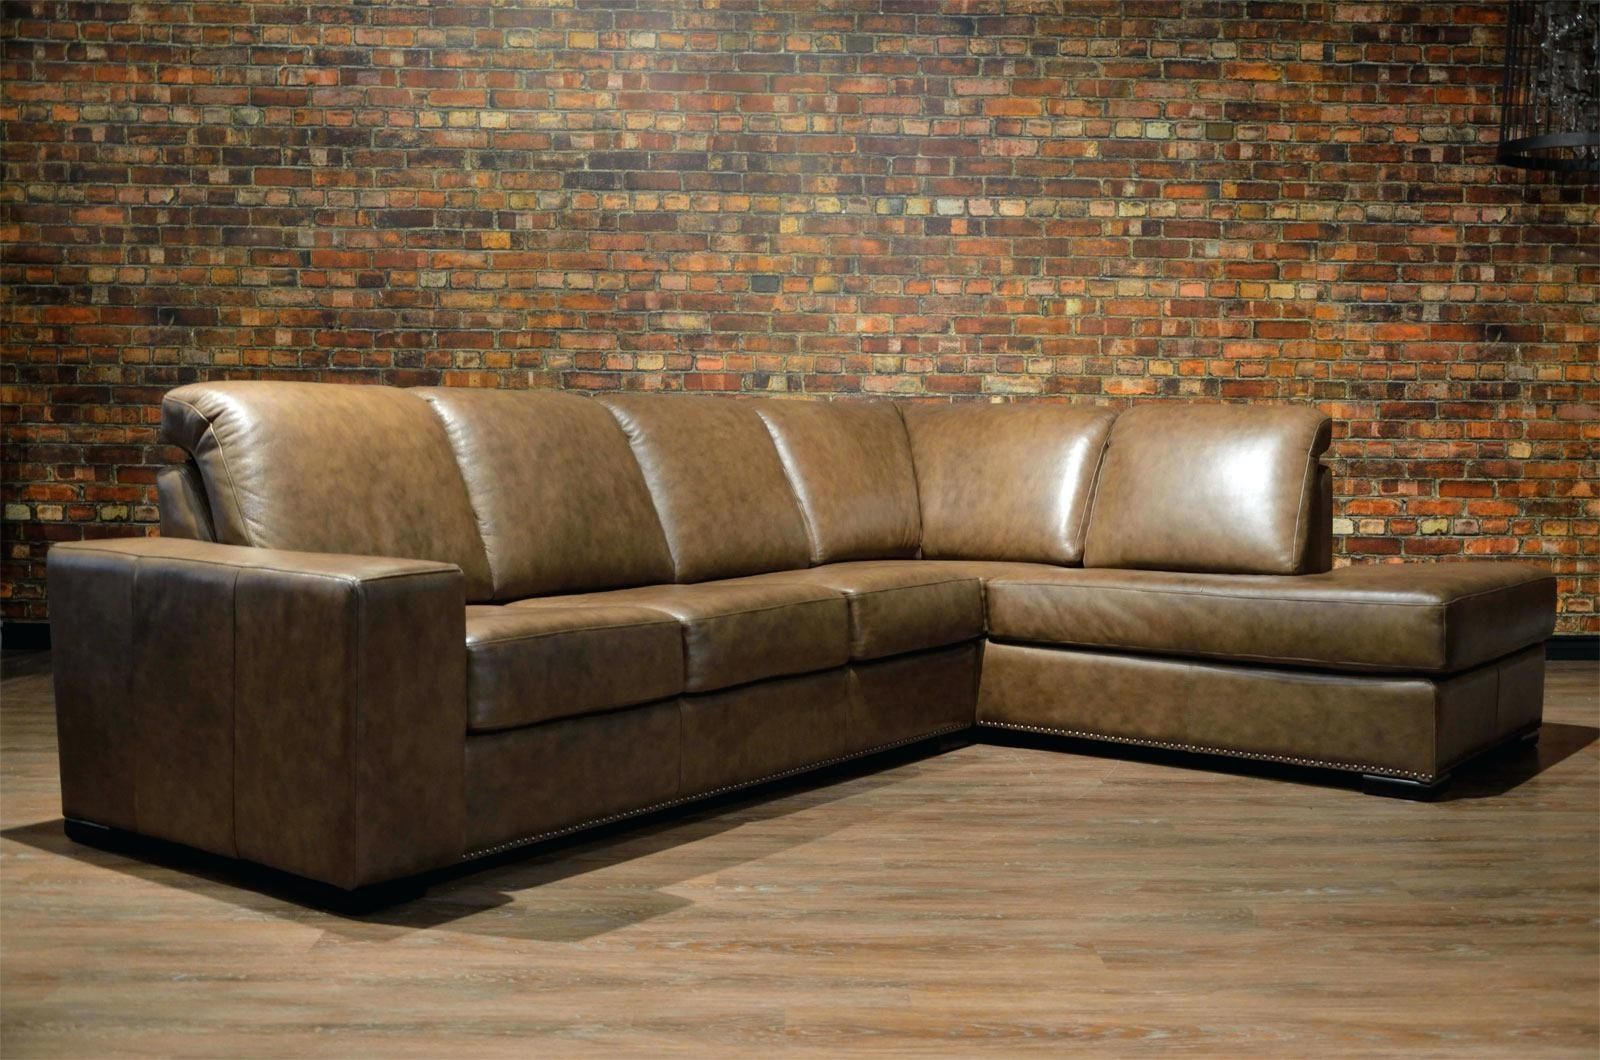 Used Leather Couches For Sale – Ncgeconference With Canada Sale Sectional Sofas (View 10 of 15)